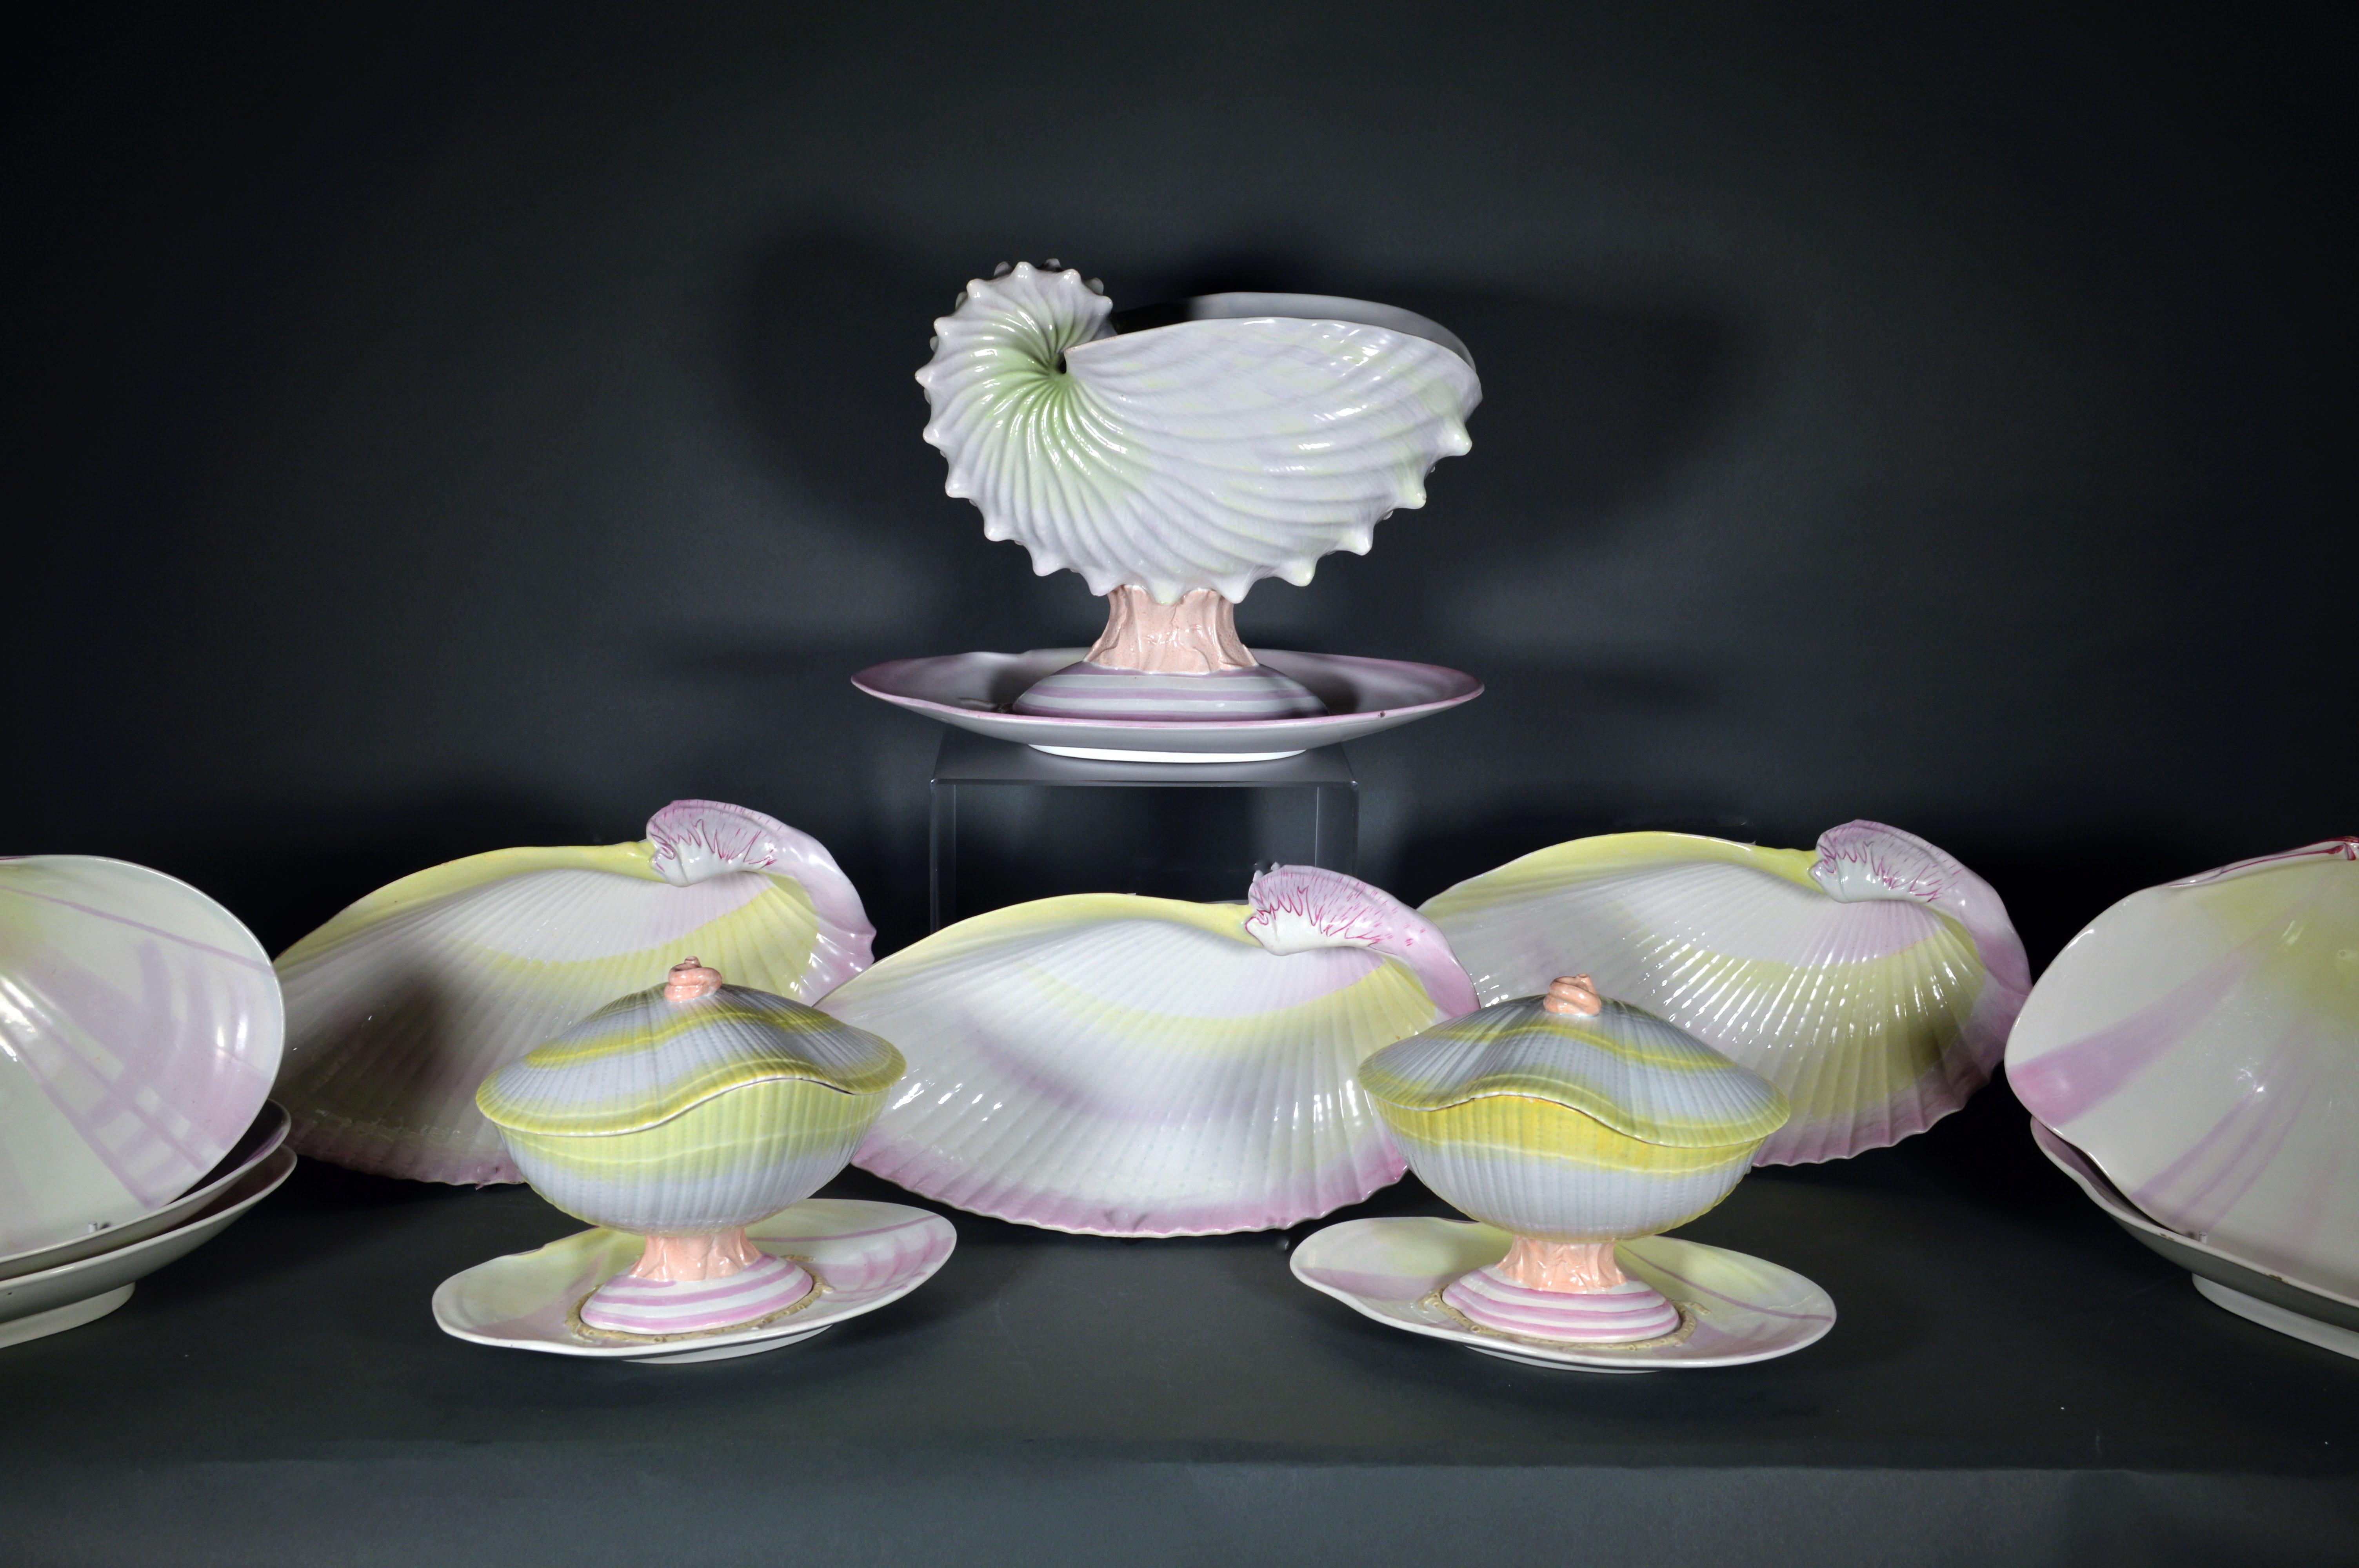 Wedgwood Nautilus yellow and pink pearlware shell service,
circa 1800-1810


The fine quality Wedgwood pearlware pottery service is known as the Nautilus design. Each piece naturalistically molded as various shells in shades of pink and unusually